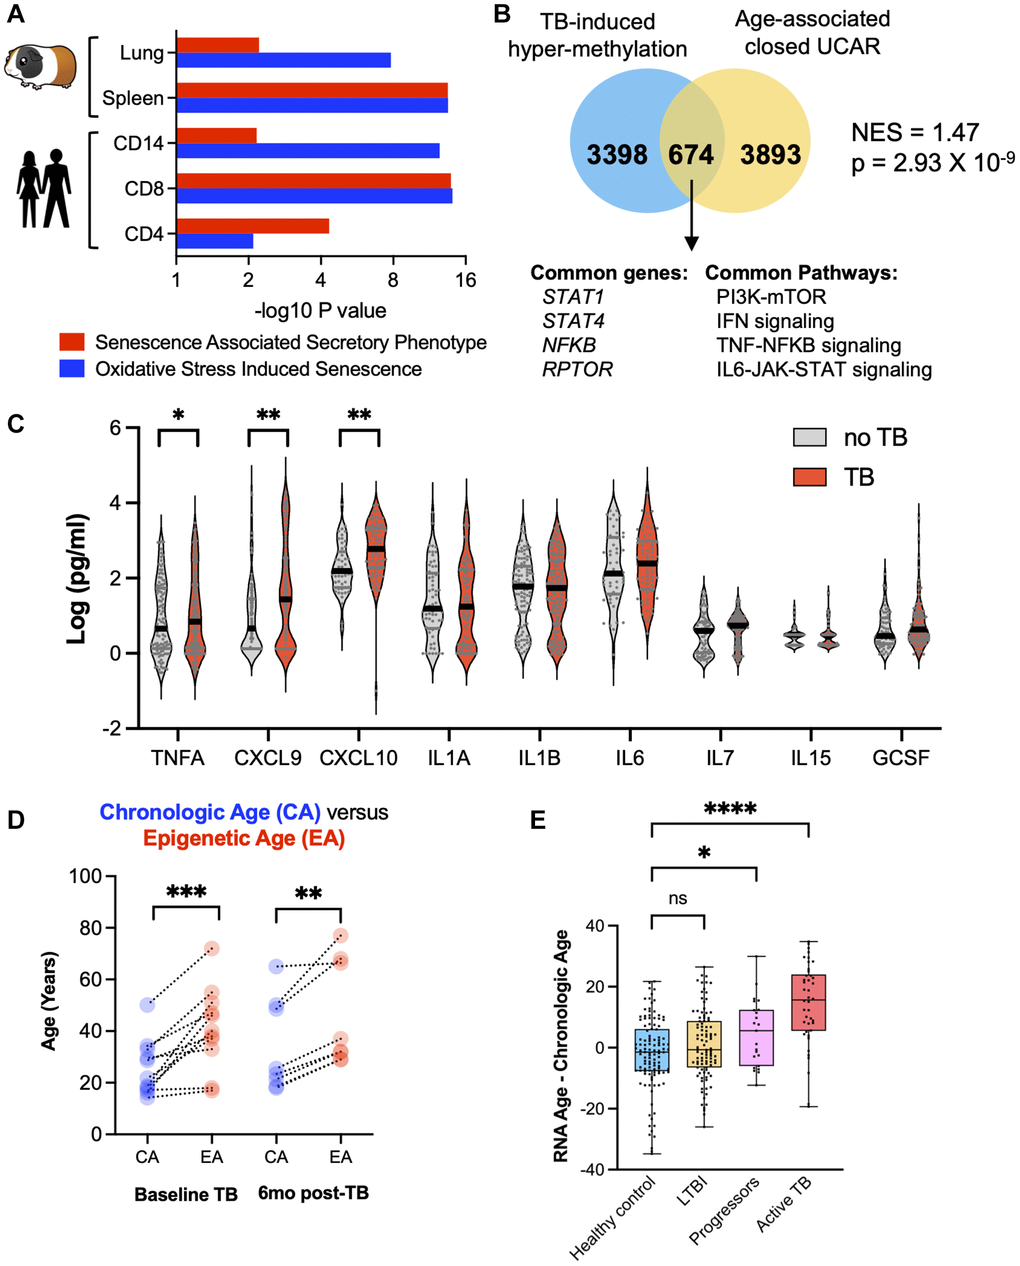 TB induced cellular senescence and premature cellular aging. (A) Humans and guinea pigs with TB demonstrated DNA hypermethylation gene changes that enriched for the SASP and OSIS pathways (Reactome overrepresentation p-values). (B) Hypermethylated genes in CD8+ T cells from patients with TB statistically overlapped with old age-associated closed chromatin conformation changes. (C) Multiplex ELISA of senescence associated proteins in patients with TB compared to healthy controls. (D) Epigenetic age (using the Horvath DNA methylation clock) is increased as compared to chronological age in TB patients at baseline and 6 months after the completion of successful anti-TB therapy. (E) Difference between chronological age and biological age using the RNA age calculator demonstrates an increase in TB patients compared to healthy controls (one-way ANOVA with Tukey’s multiple comparison).